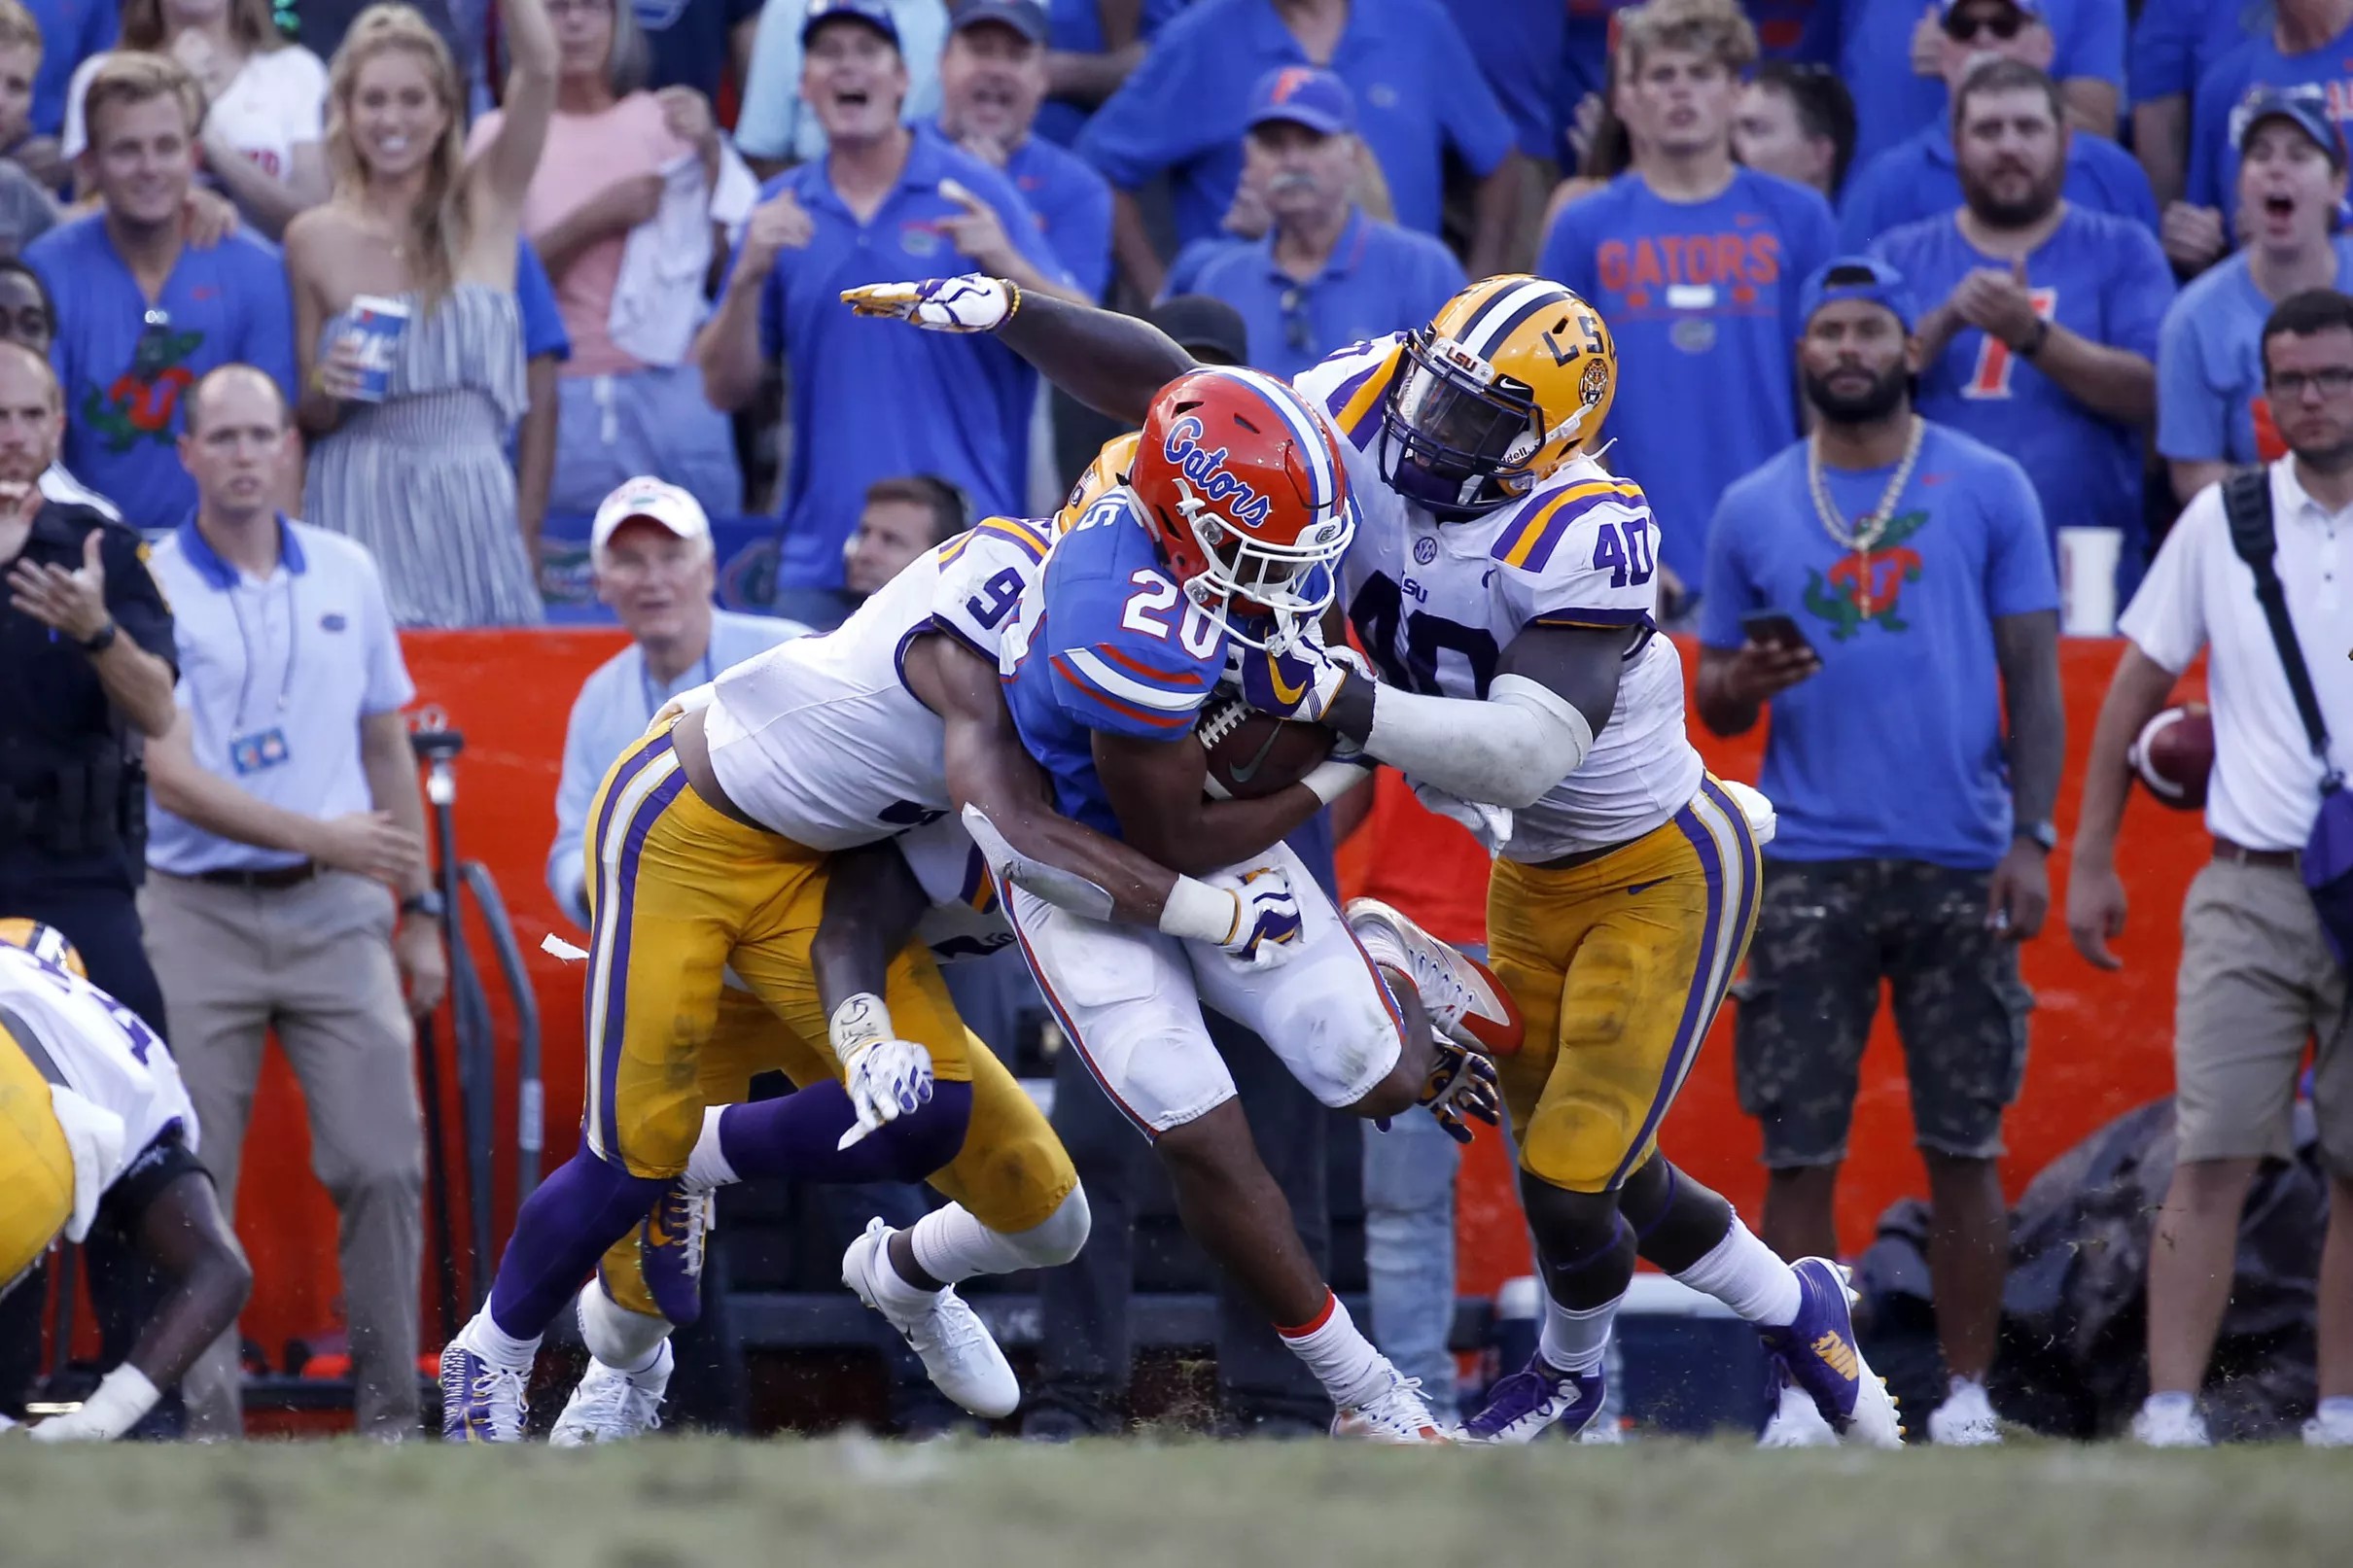 LSU vs. Florida What To Watch For